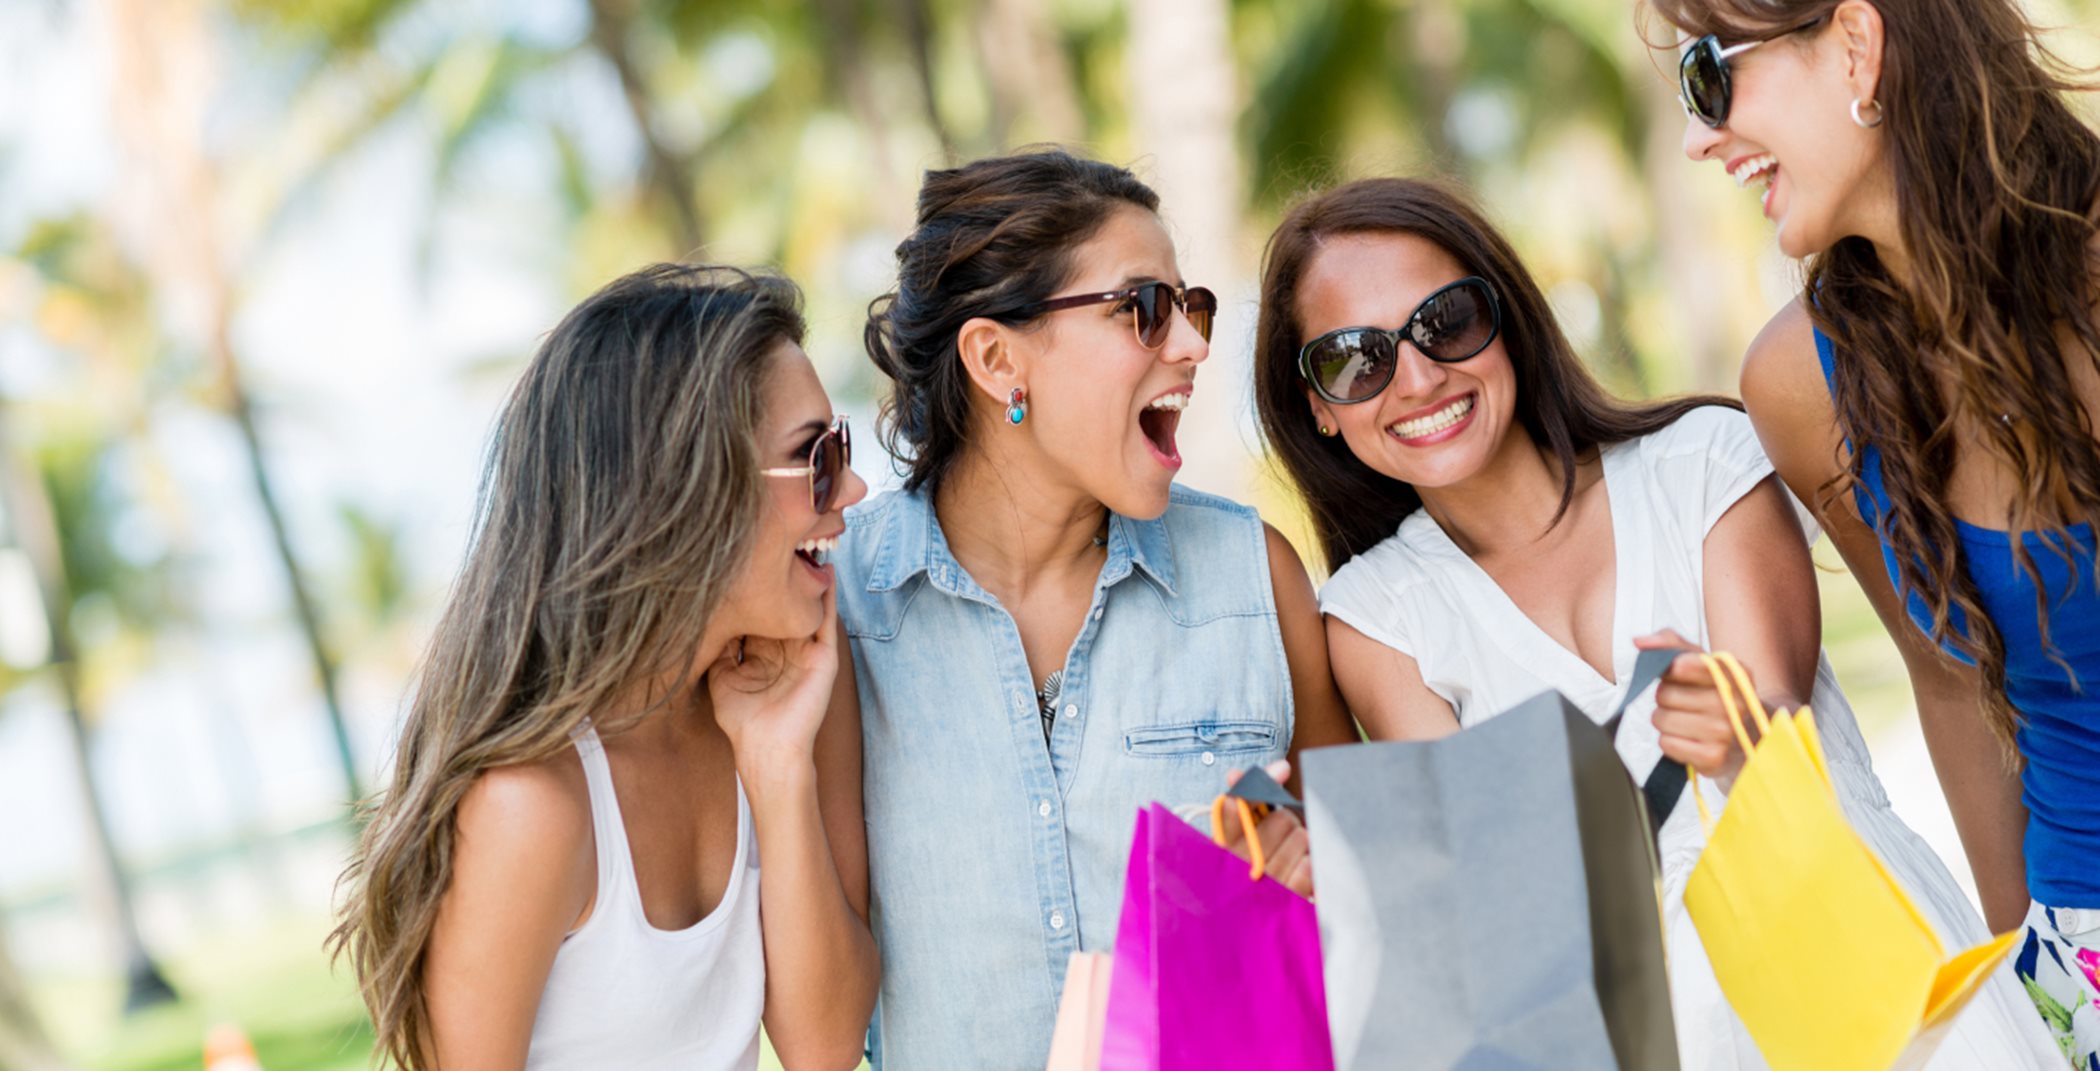 Adult women laughing and shopping